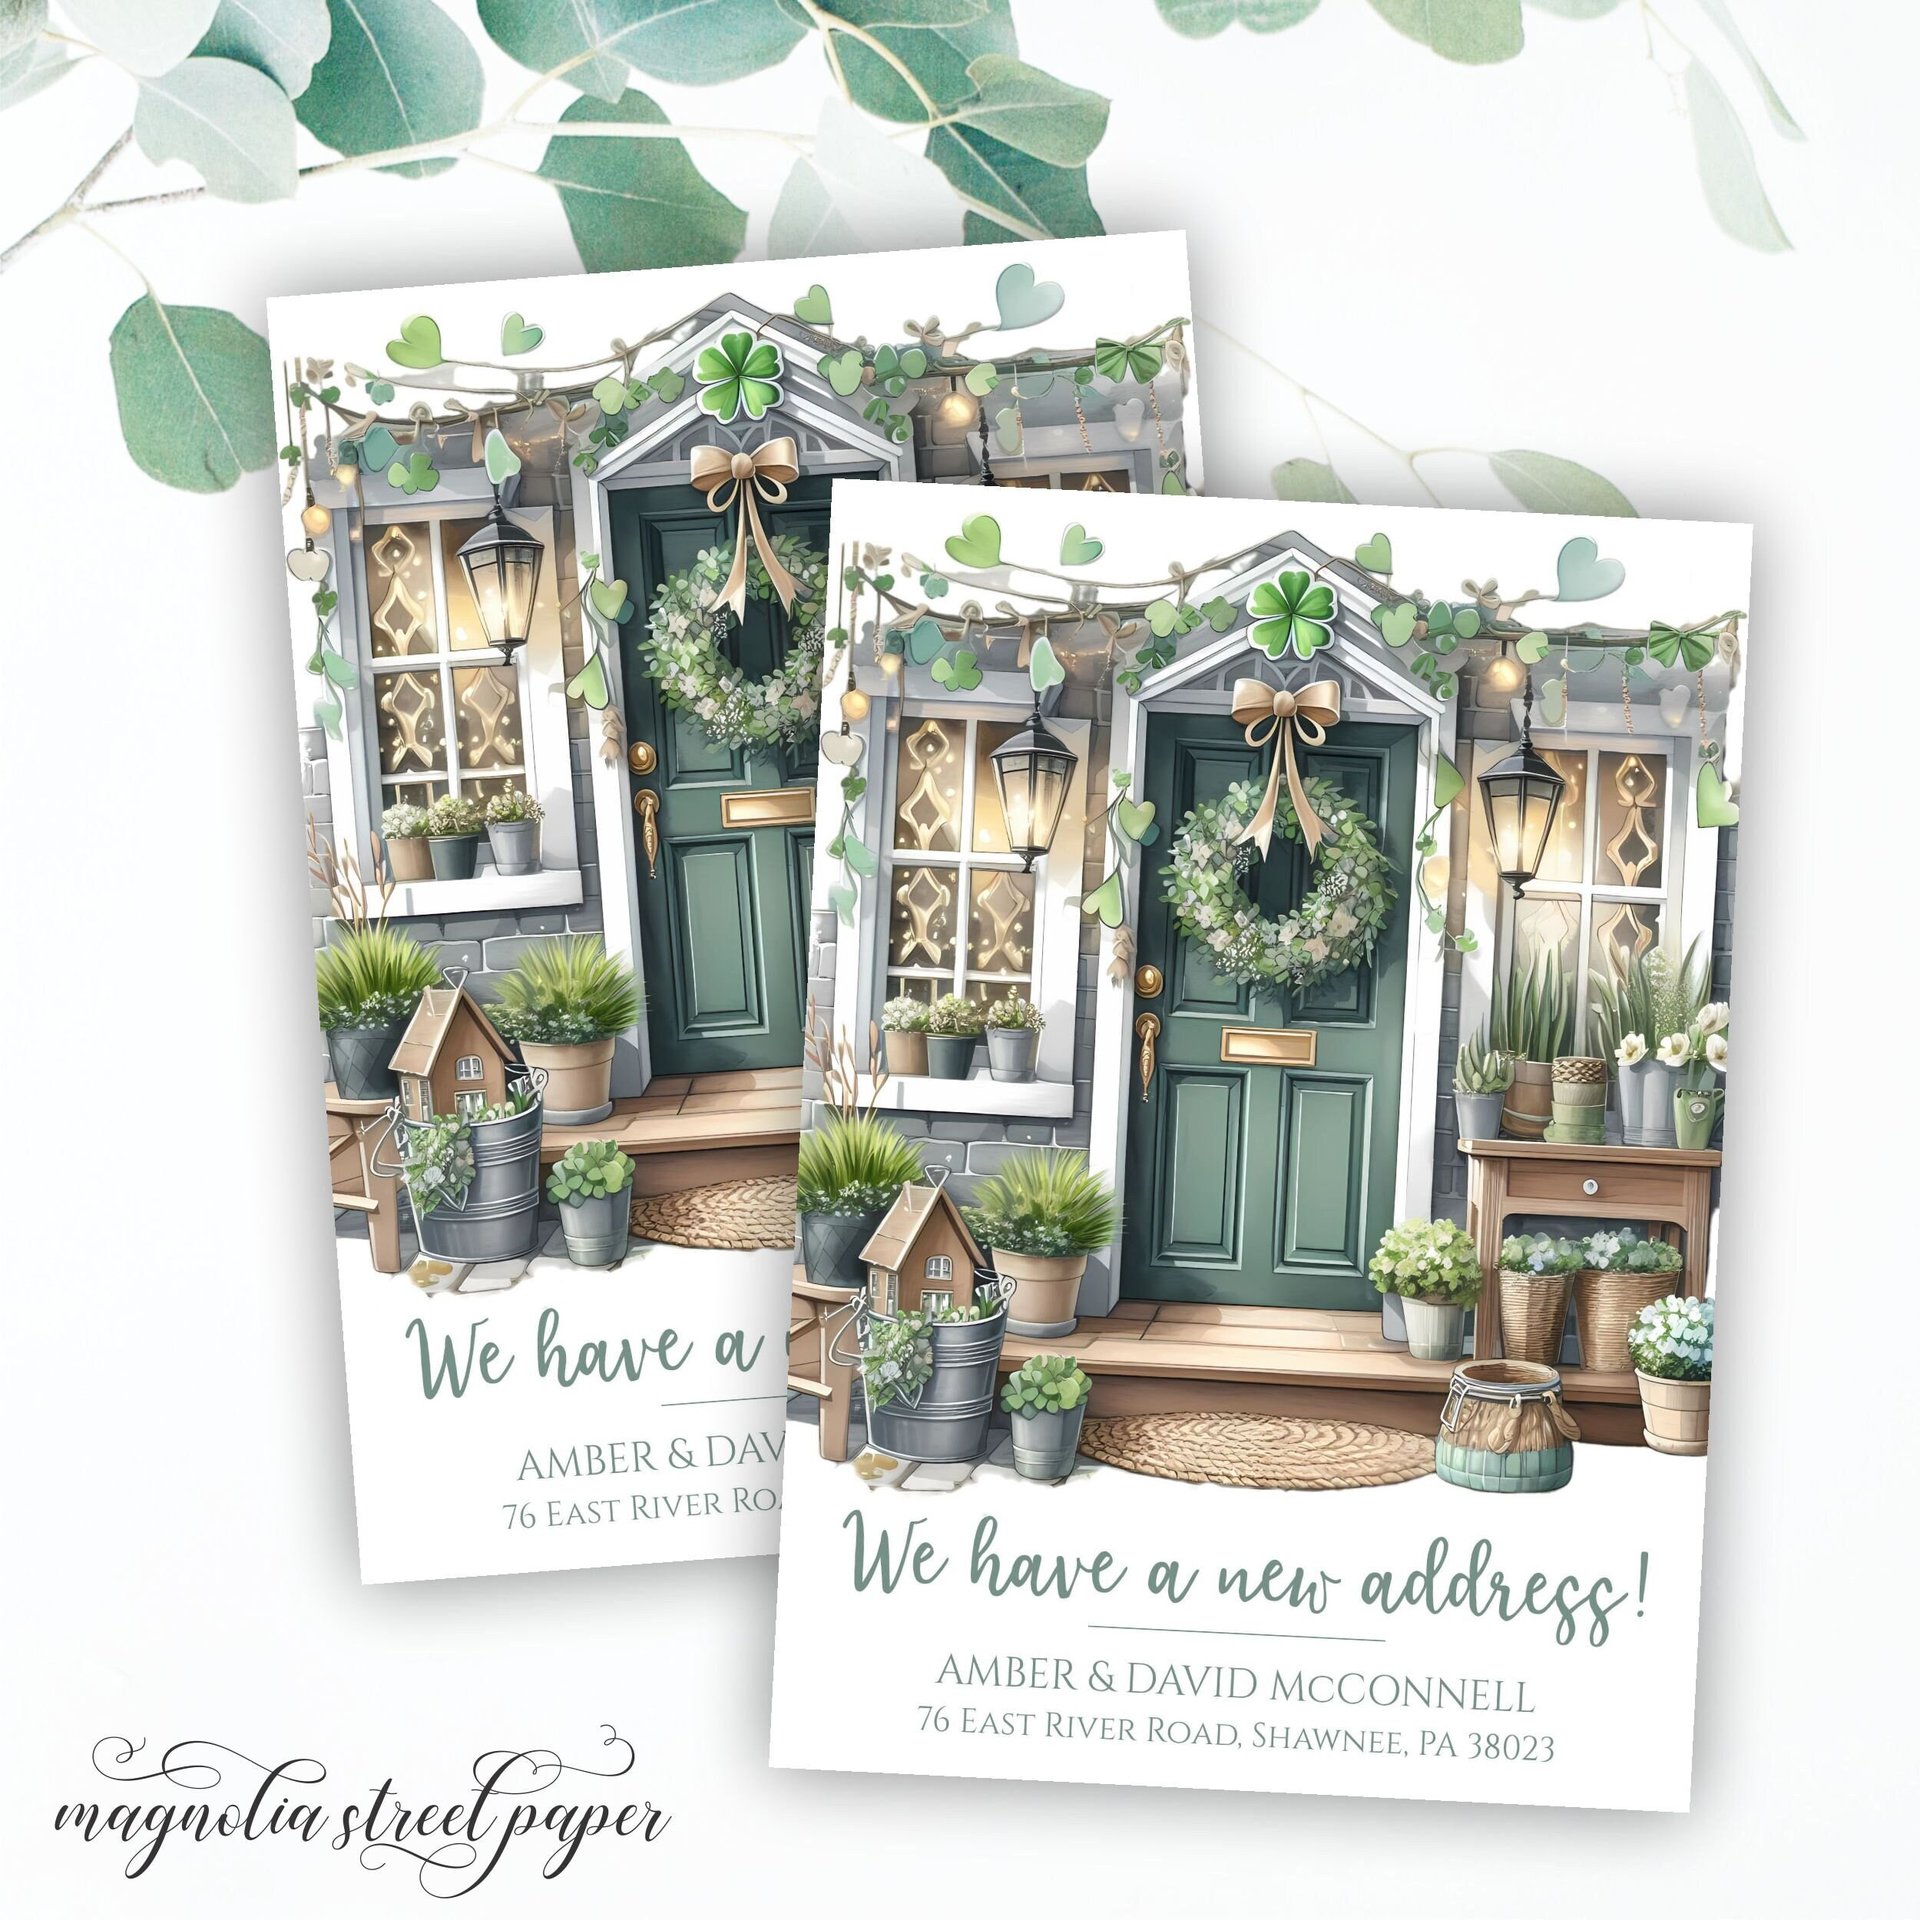 St. Patrick's Day New Address Change Card, Hearts and Shamrocks Cute Front Door